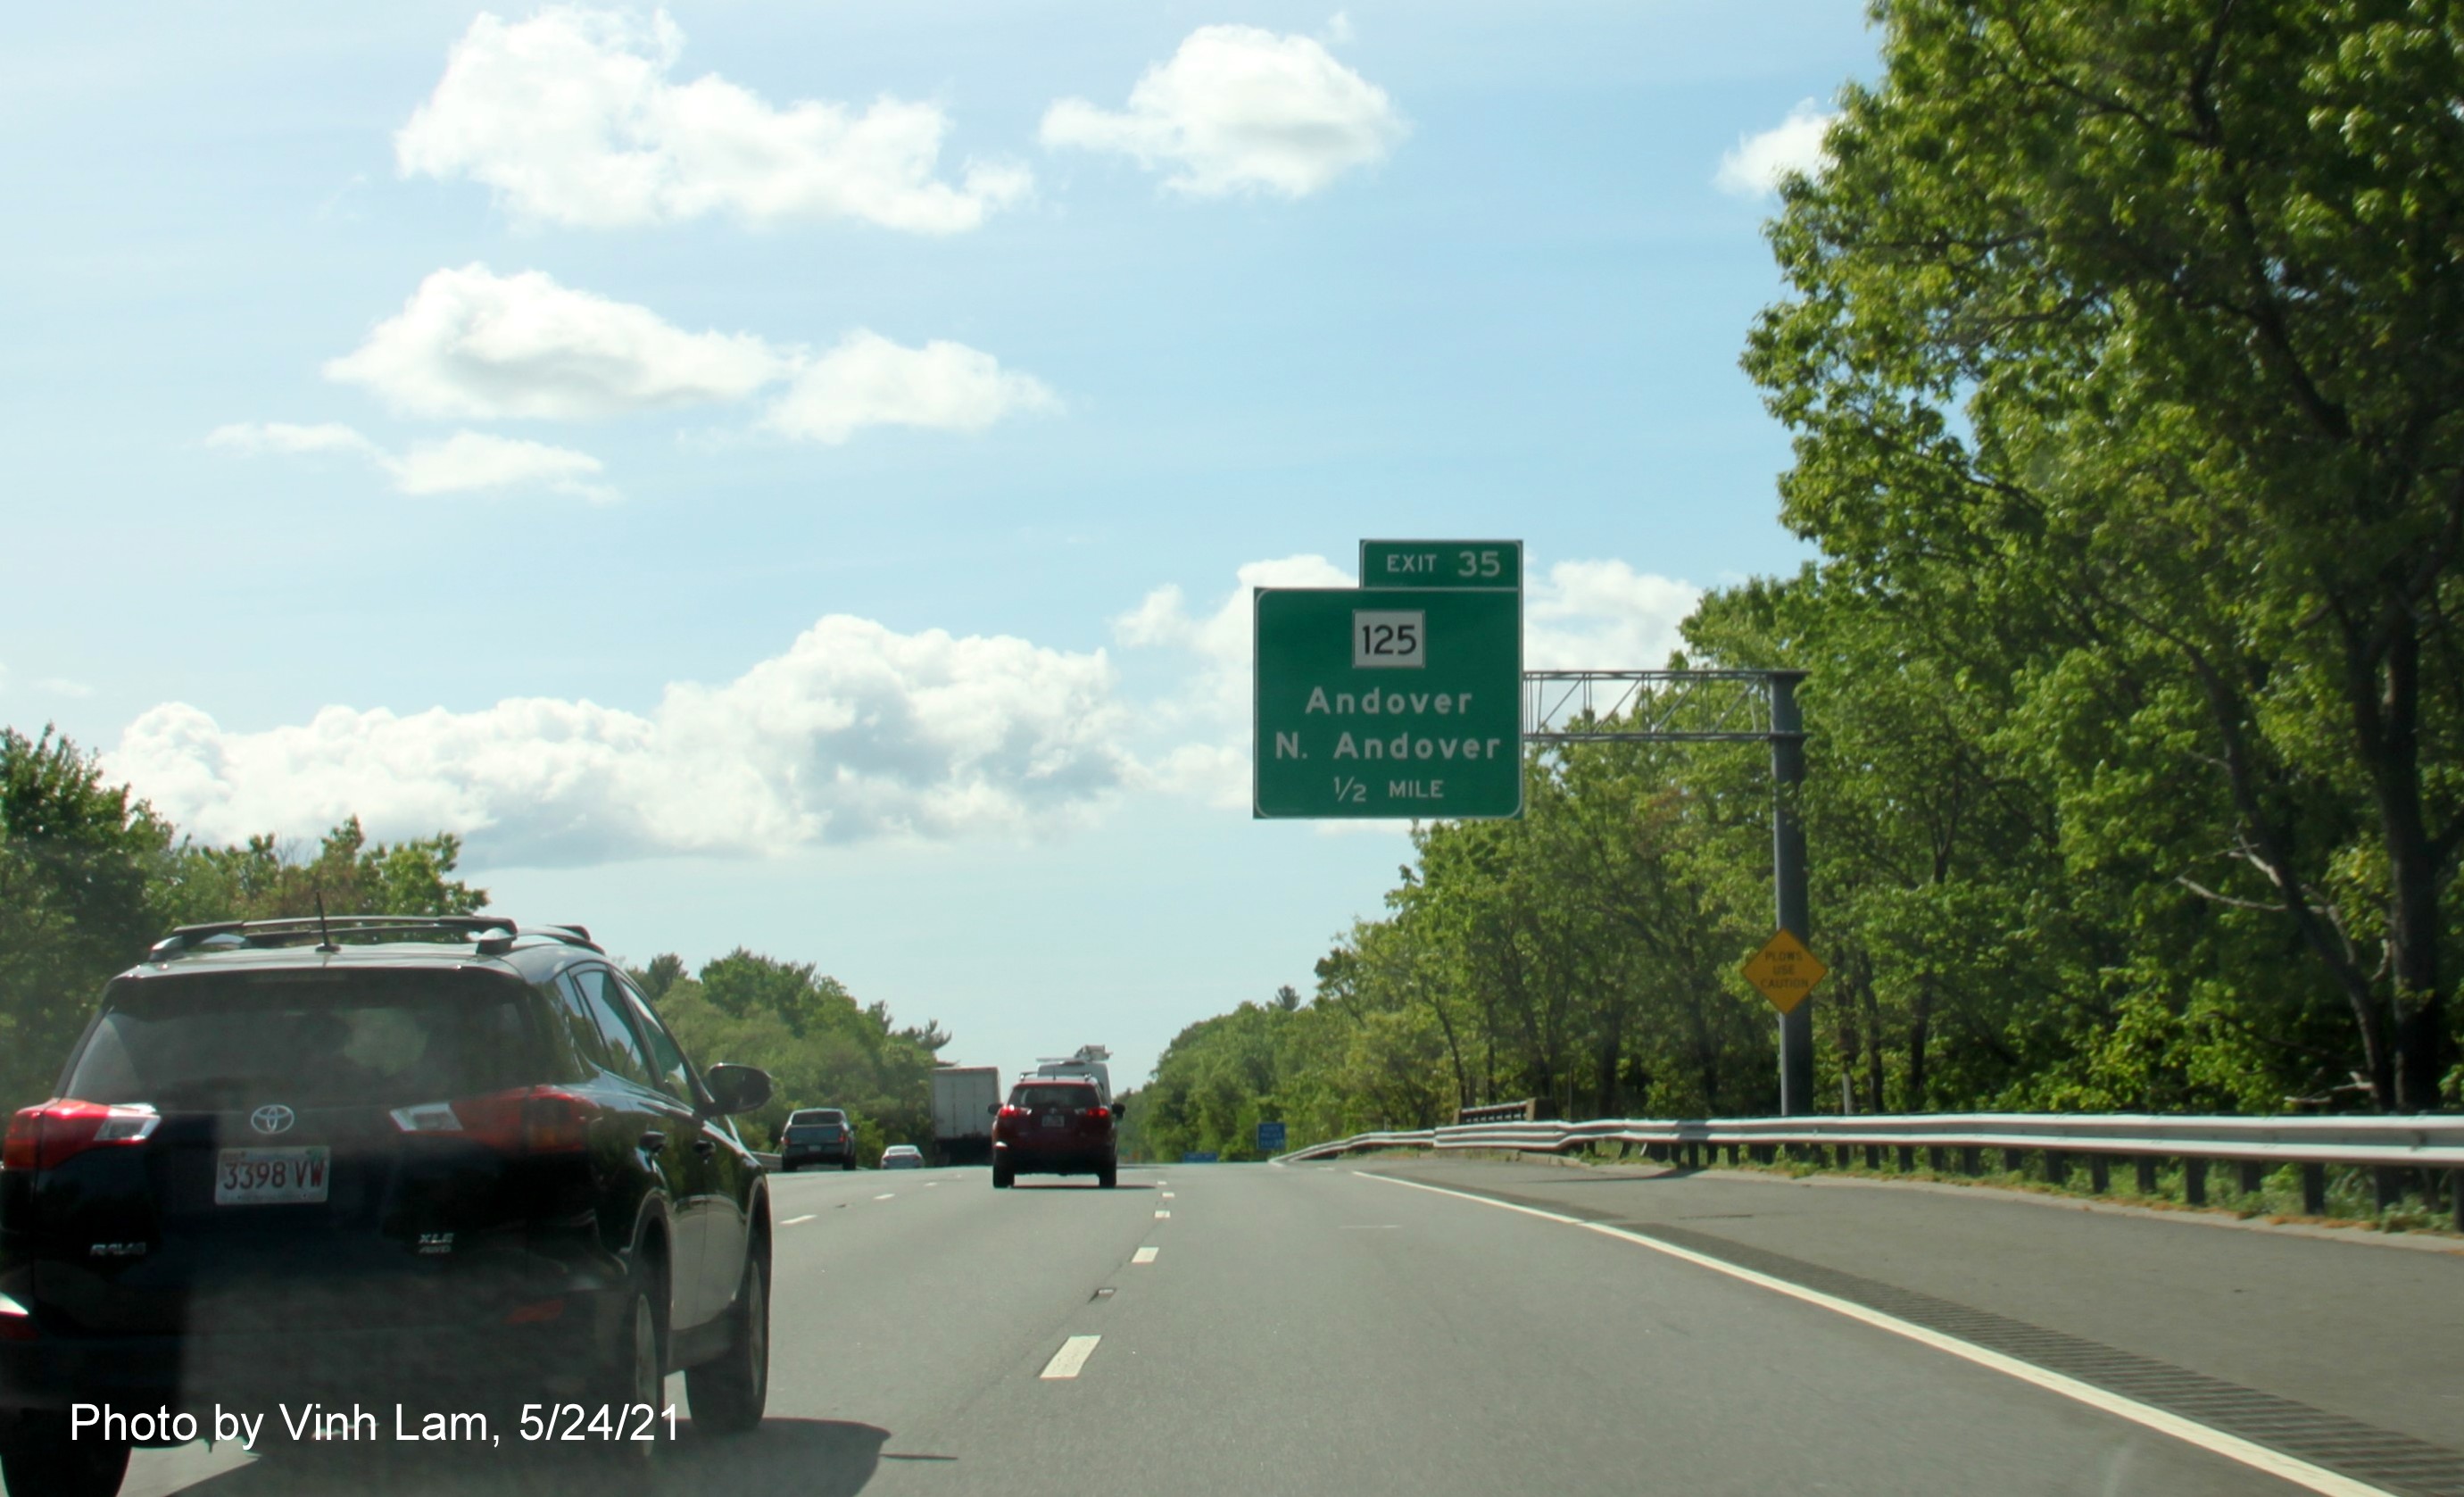 Image of 1/2 mile advance overhead sign for MA 125 exit with new milepost based exit number on I-93 South in Wilmington, by Vinh Lam, May 2021